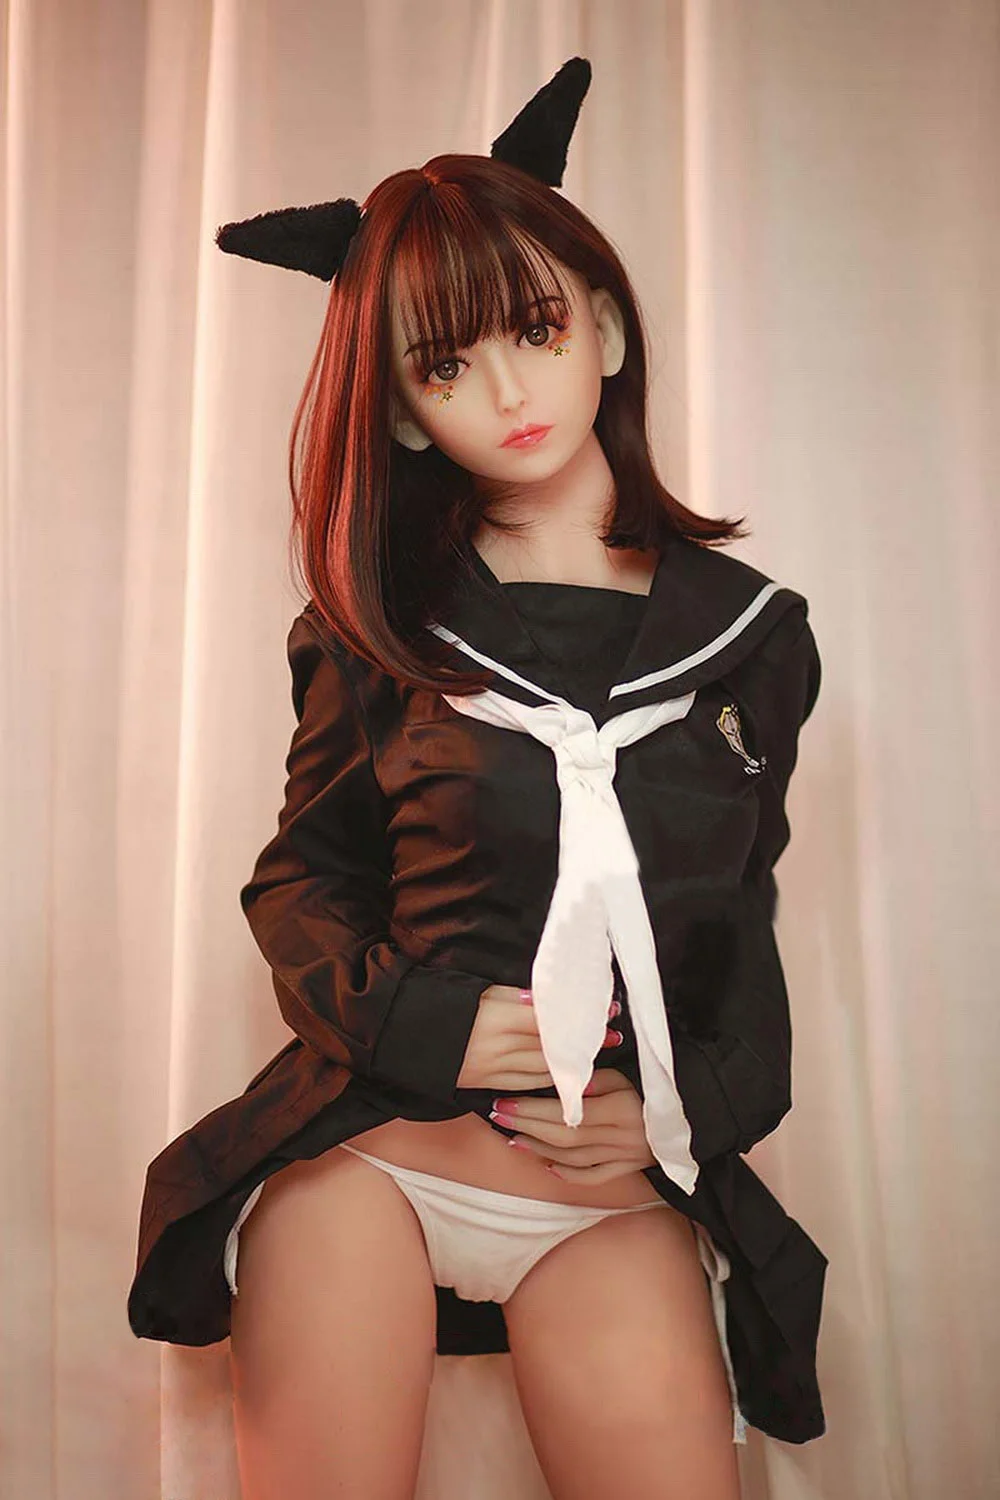 An anime sex doll that lifts up a skirt and reveals panties